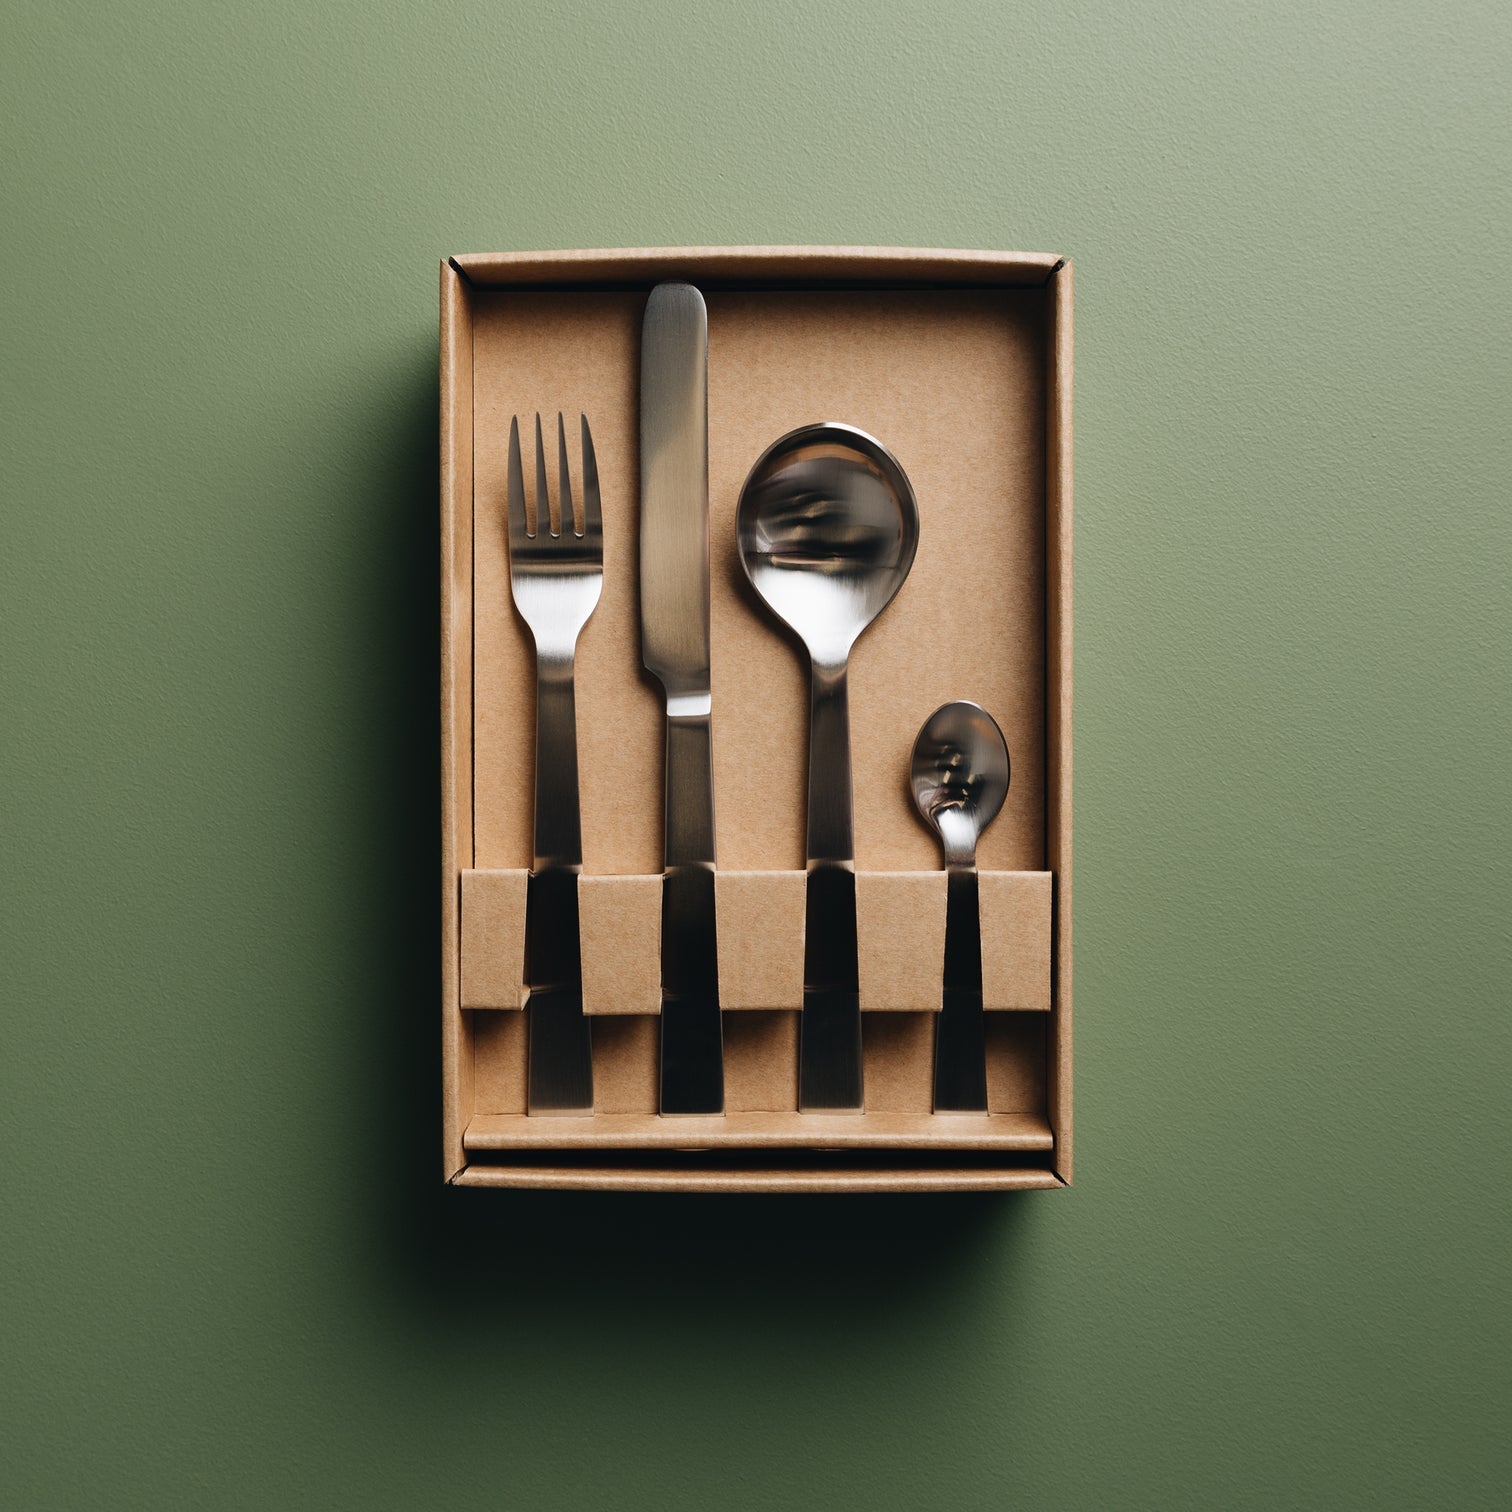 Acme Cutlery 24pc Brushed